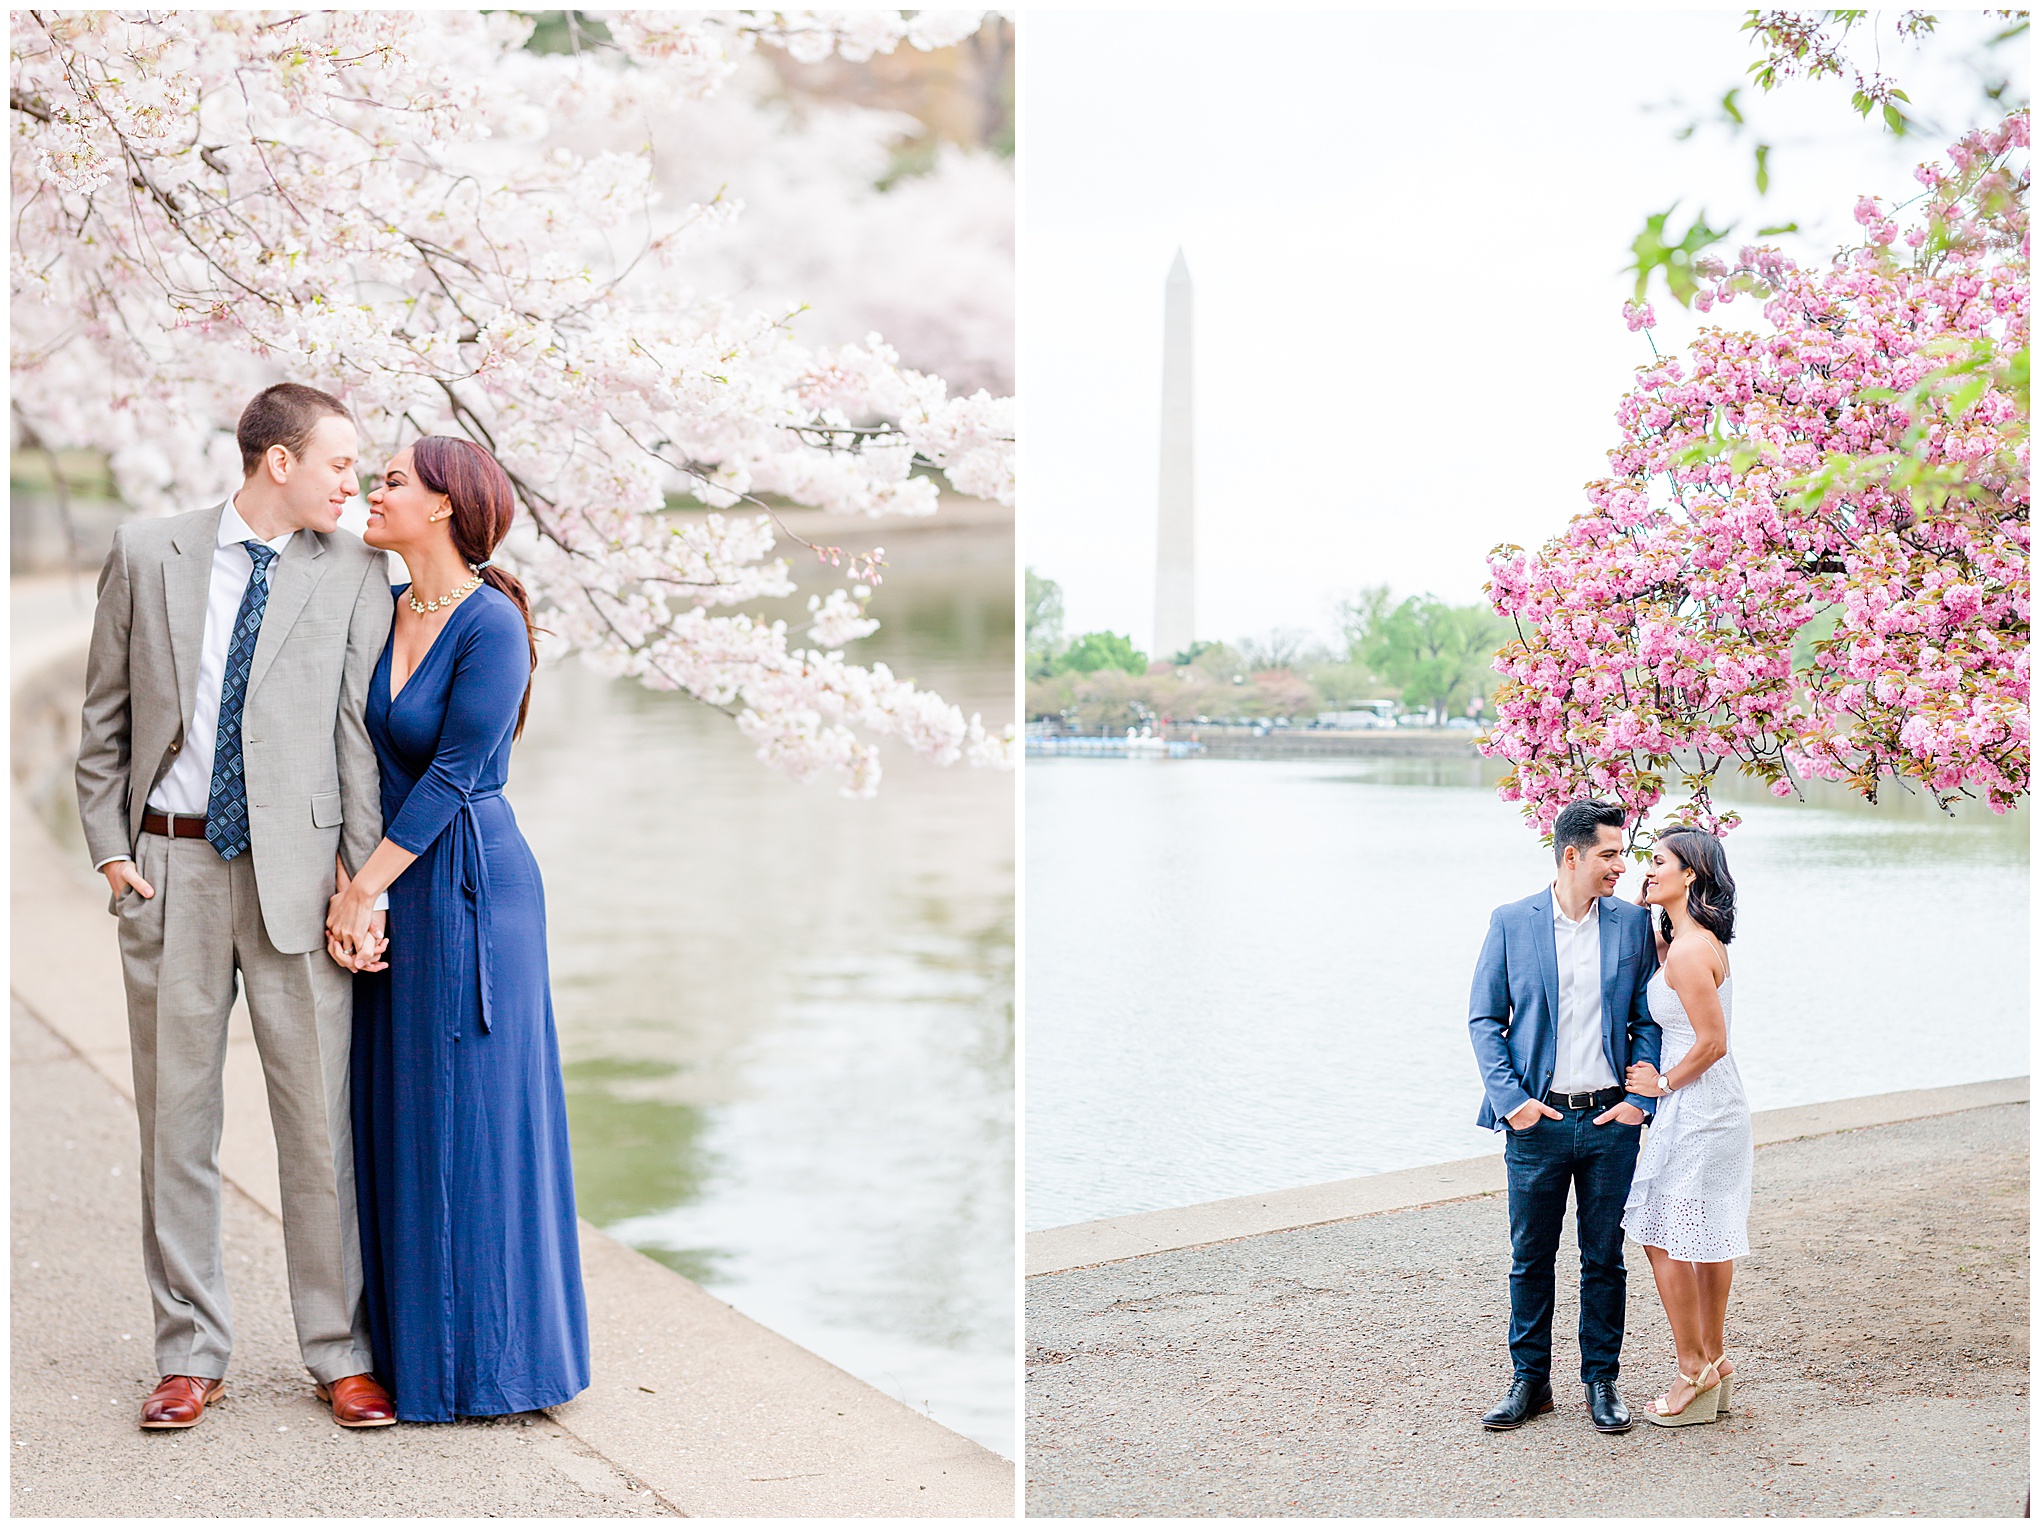 cherry blossoms photo shooot outfit ideas, D.C. cherry blossoms photographer, D.C. cherry blossoms, D.C. tidal basin, D.C. photographer, D.C. engagement photographer, D.C. wedding photographer, Rachel E.H. Photography, spring portraits, photo shoot outfits, spring outfits, engagement photos